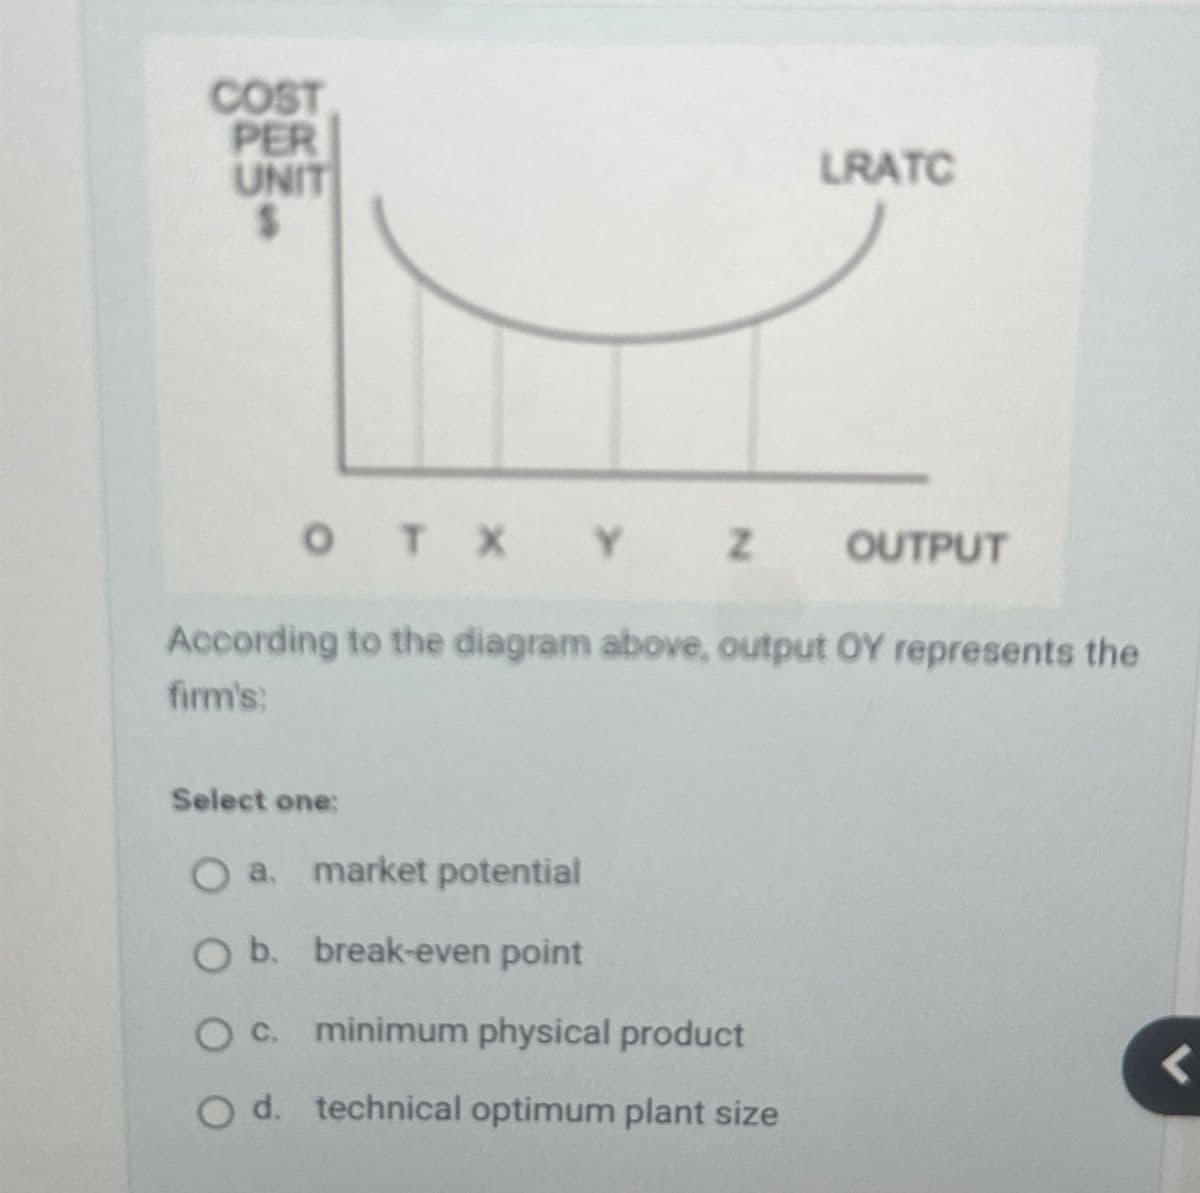 COST
PER
UNIT
LRATC
OTX Y Z OUTPUT
According to the diagram above, output OY represents the
firm's:
Select one:
O a. market potential
O b. break-even point
O c. minimum physical product
O d. technical optimum plant size